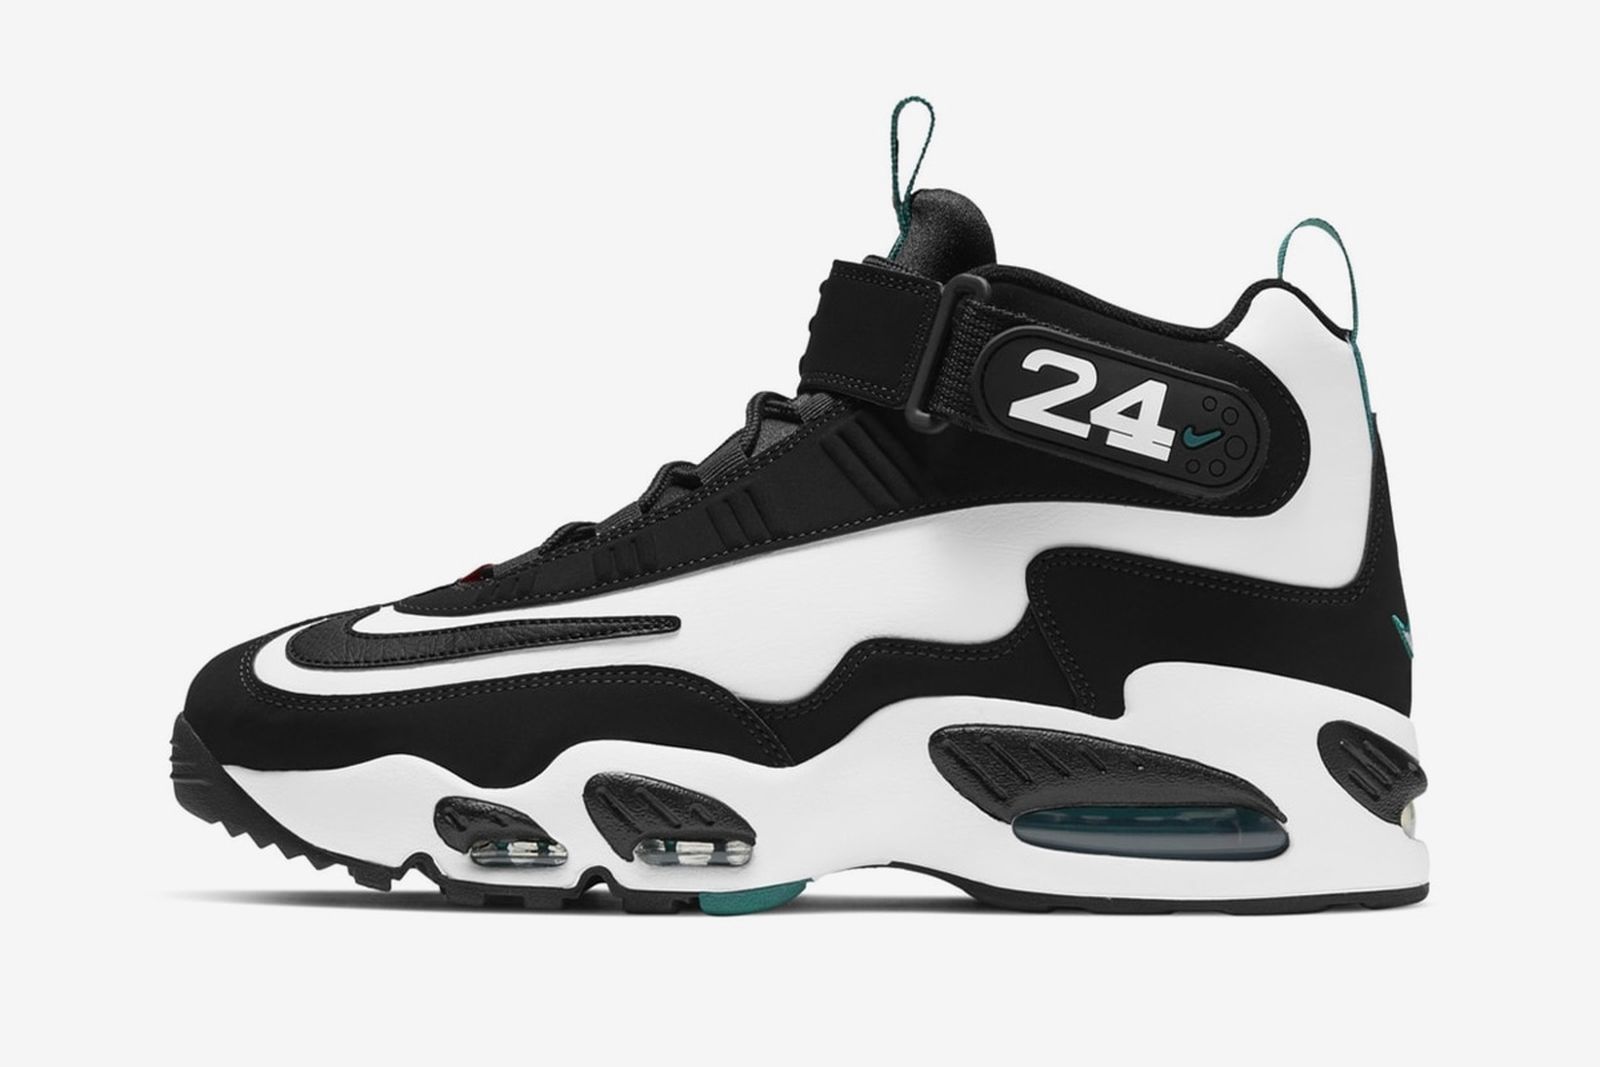 Nike griffey freshwater Air Griffey Max 1 Retro 2021: Release, Date, Price Info